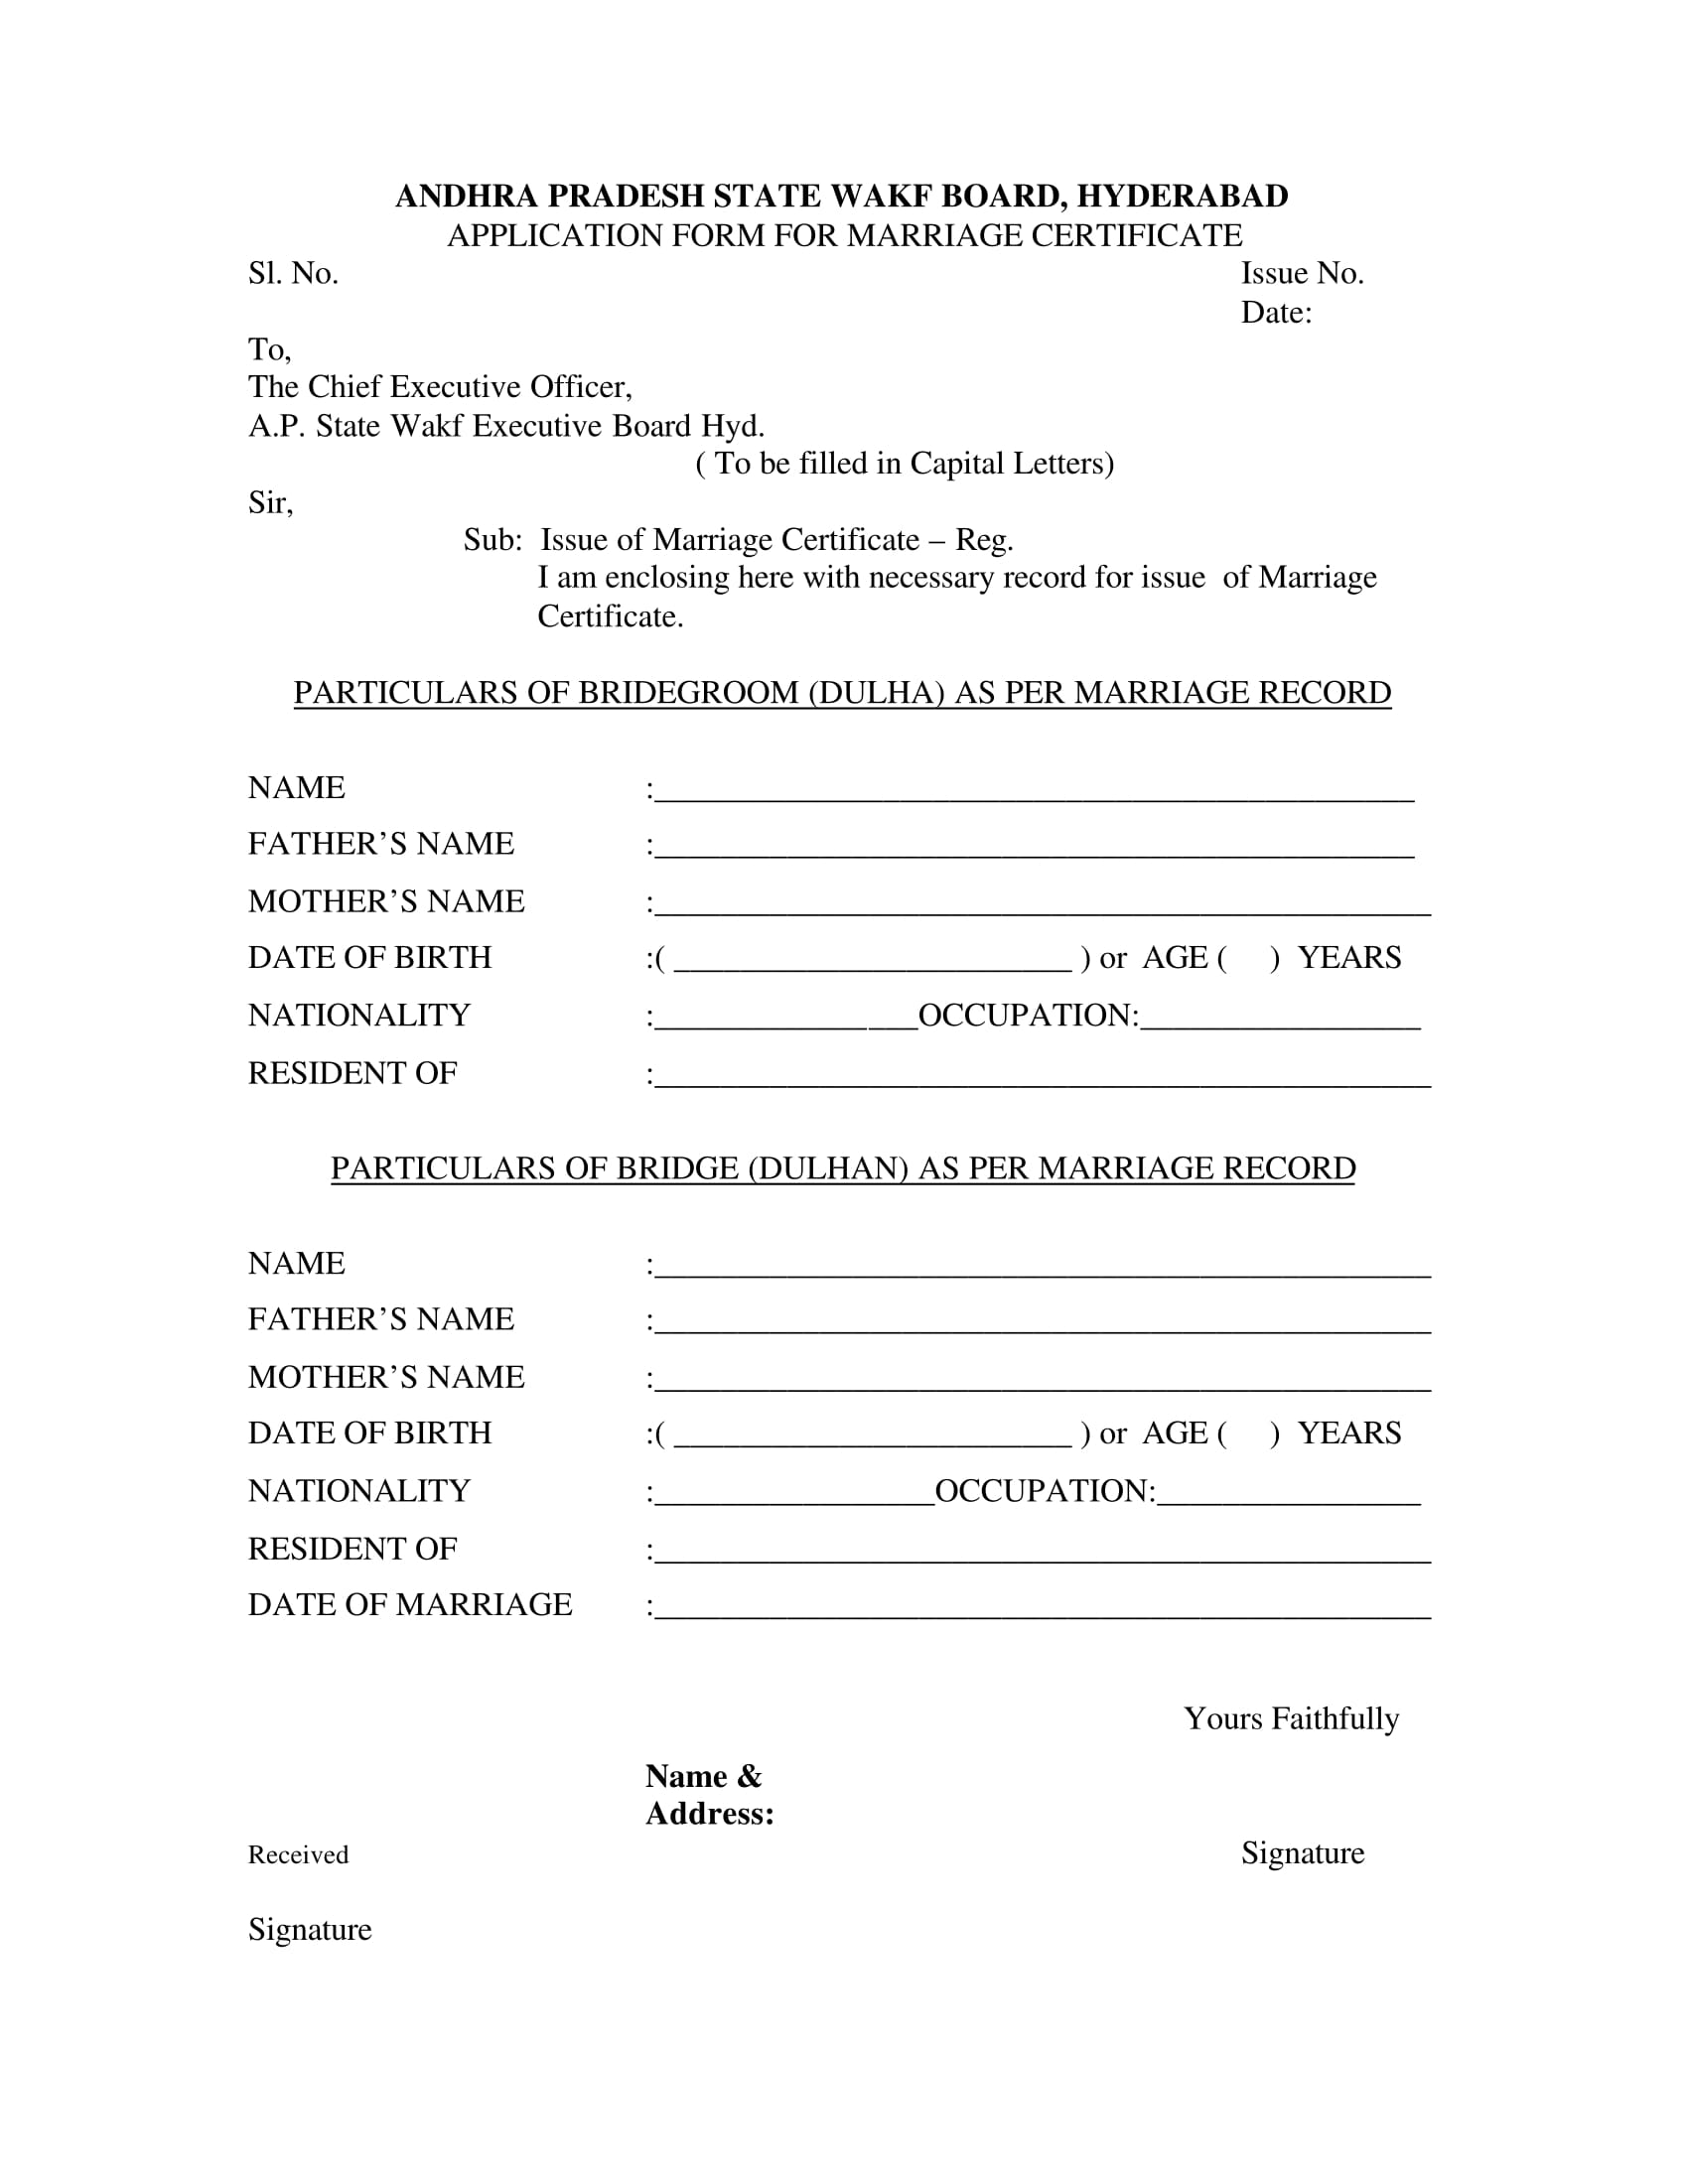 marriage certificate application form 1